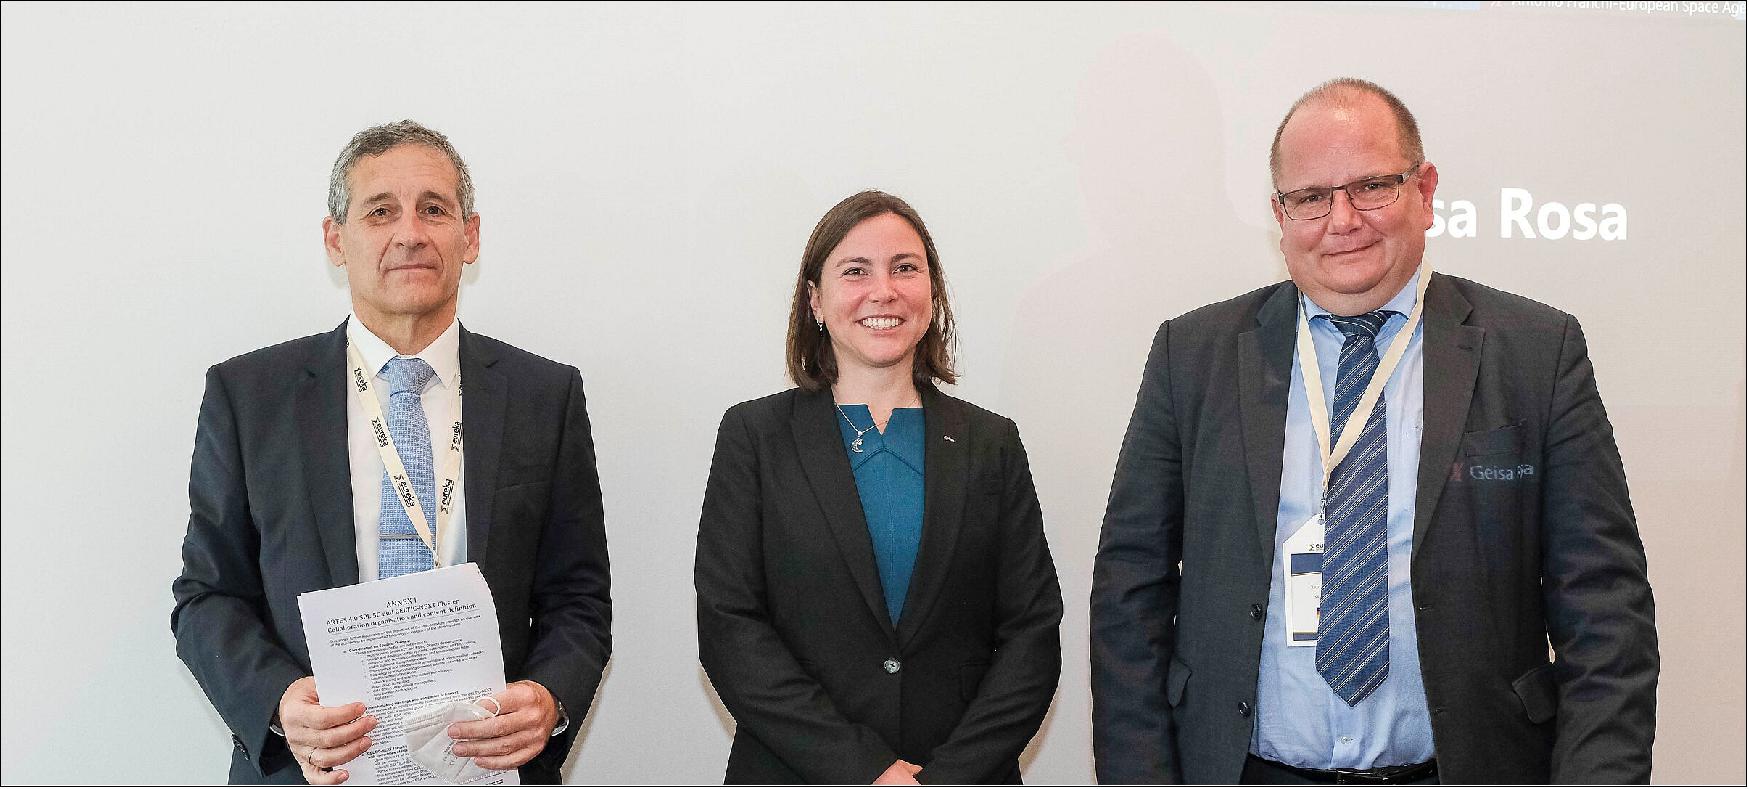 Figure 8: Signatories of the partnership between ESA, Eureka and Celtic-Next. From left: Eureka Chairman Miguel Bello Mora, Elodie Viau – Director of Telecommunications and Integrated Applications and Head of ECSAT at the European Space Agency (ESA), and CELTIC Office Director Xavier Priem (image credit: ESA)